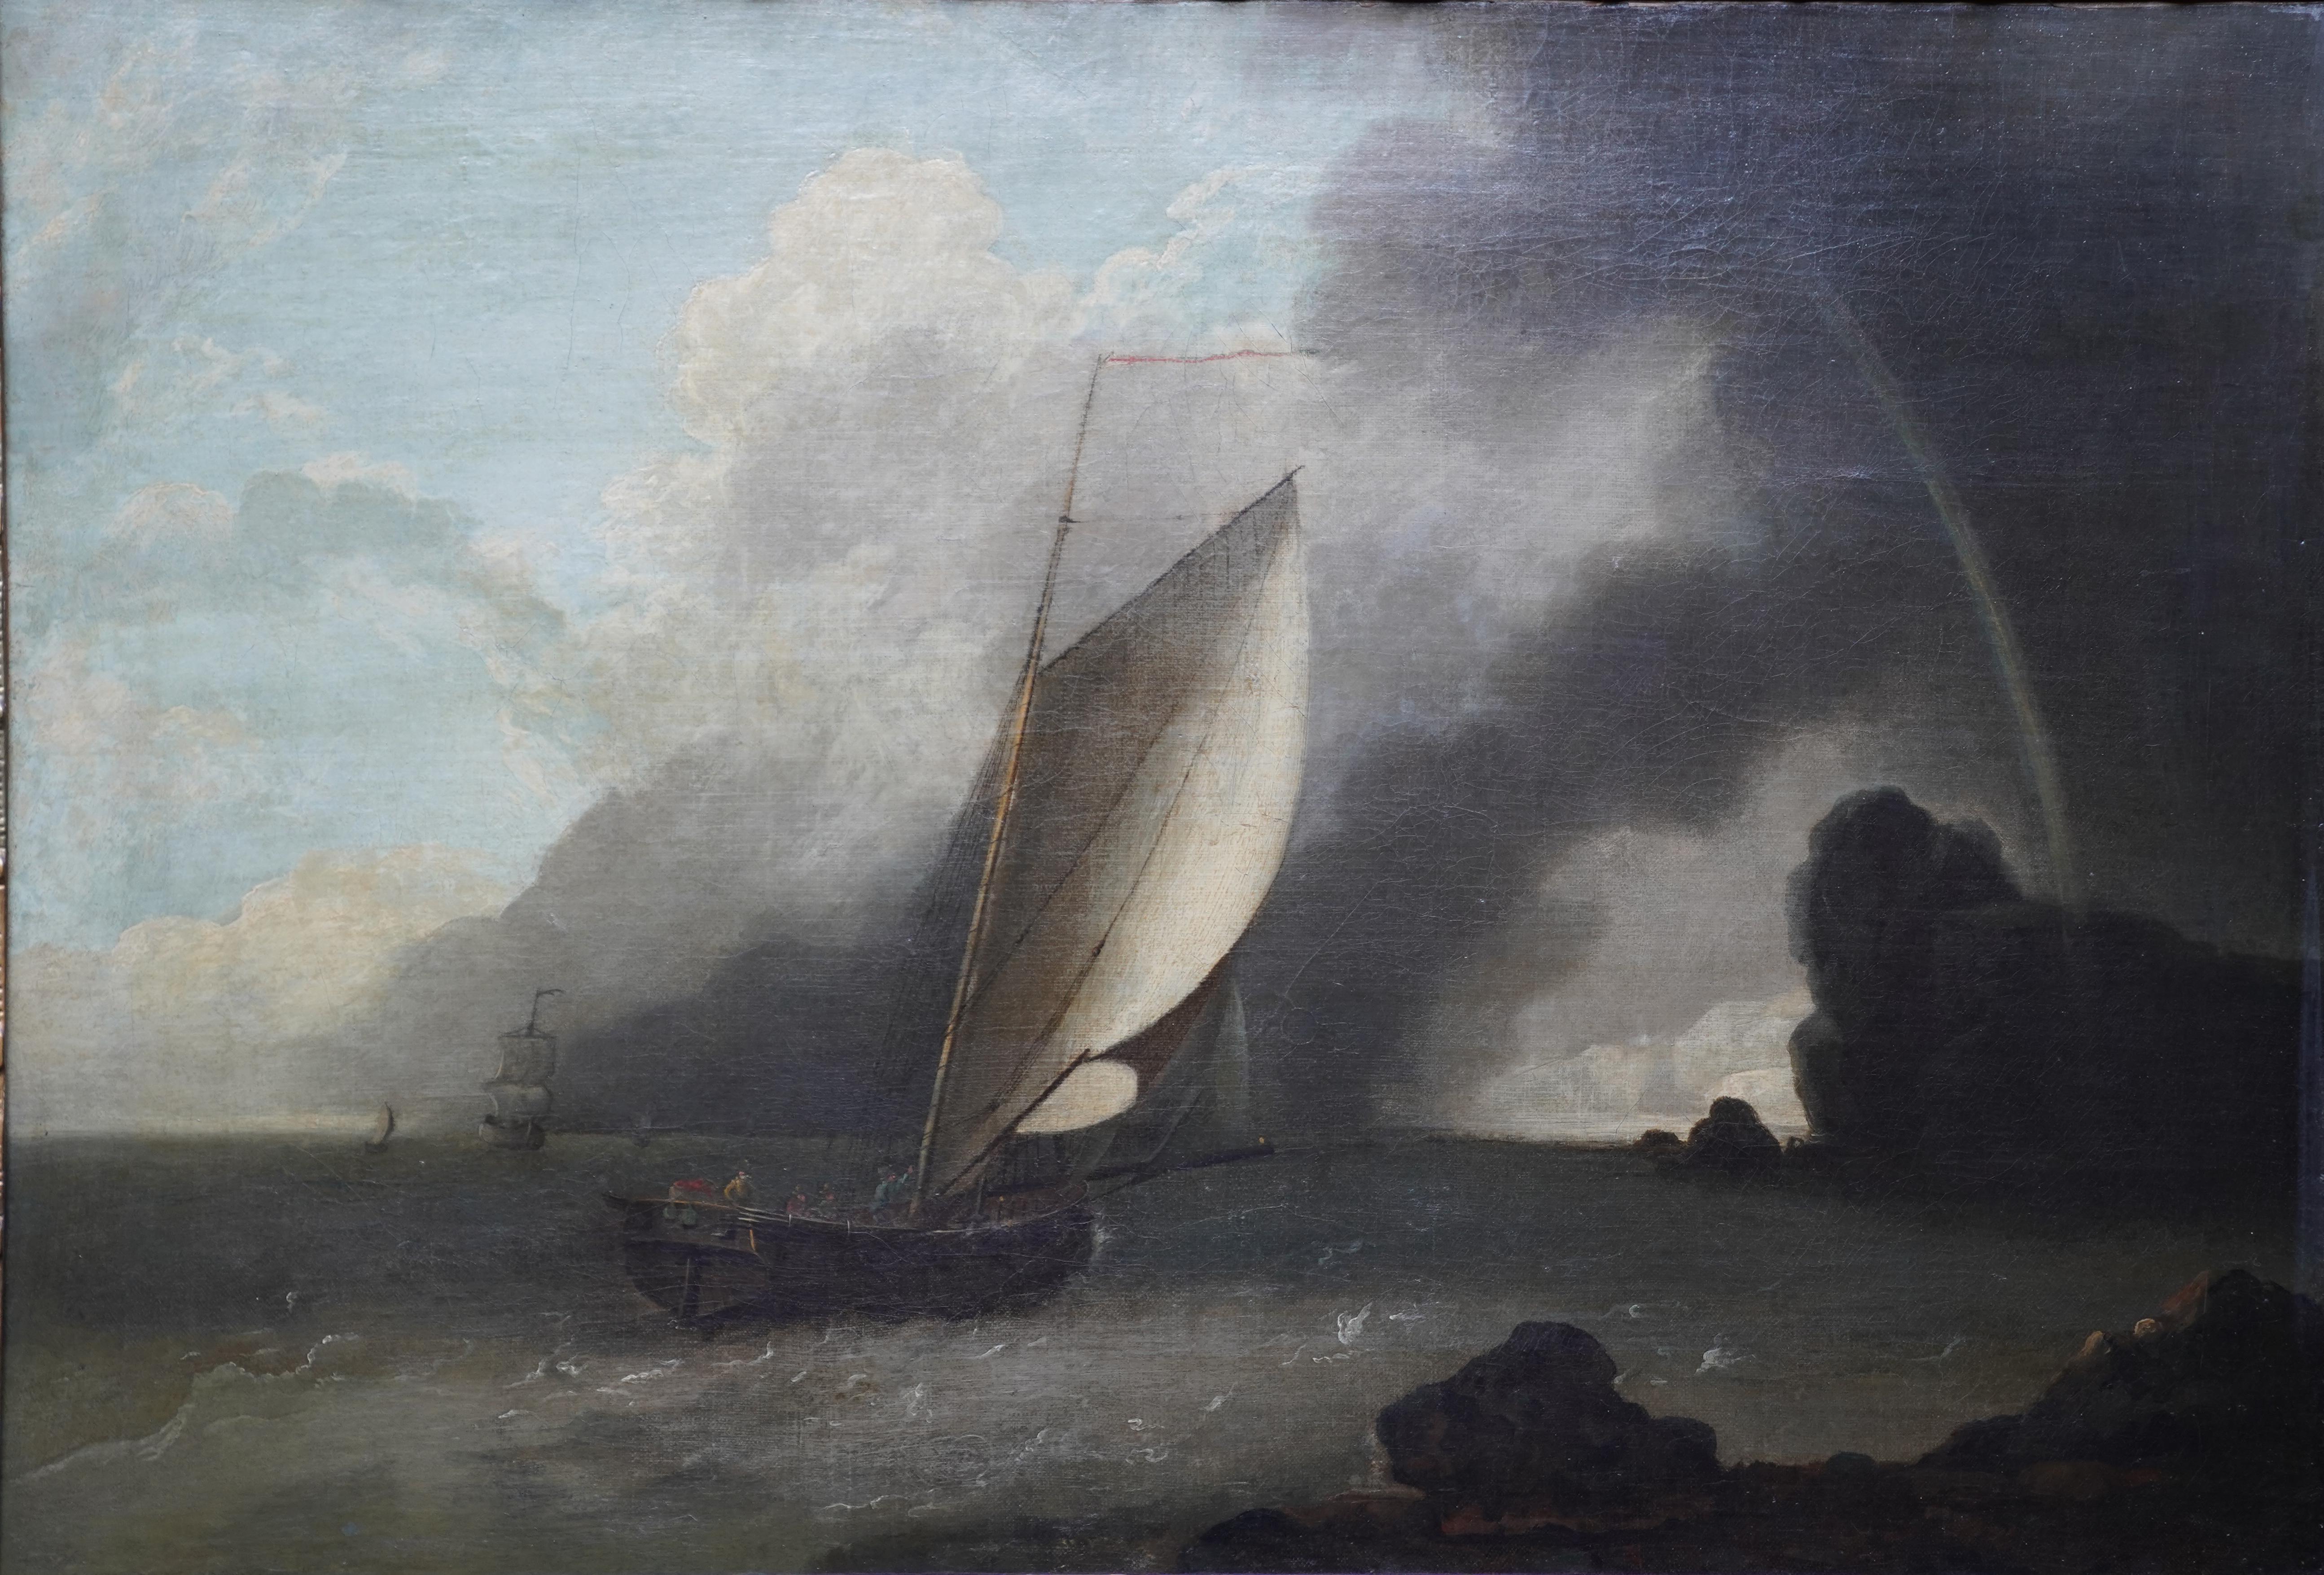 A Shipping Scene in Stormy Weather - Dutch 17th century art marine oil painting 5